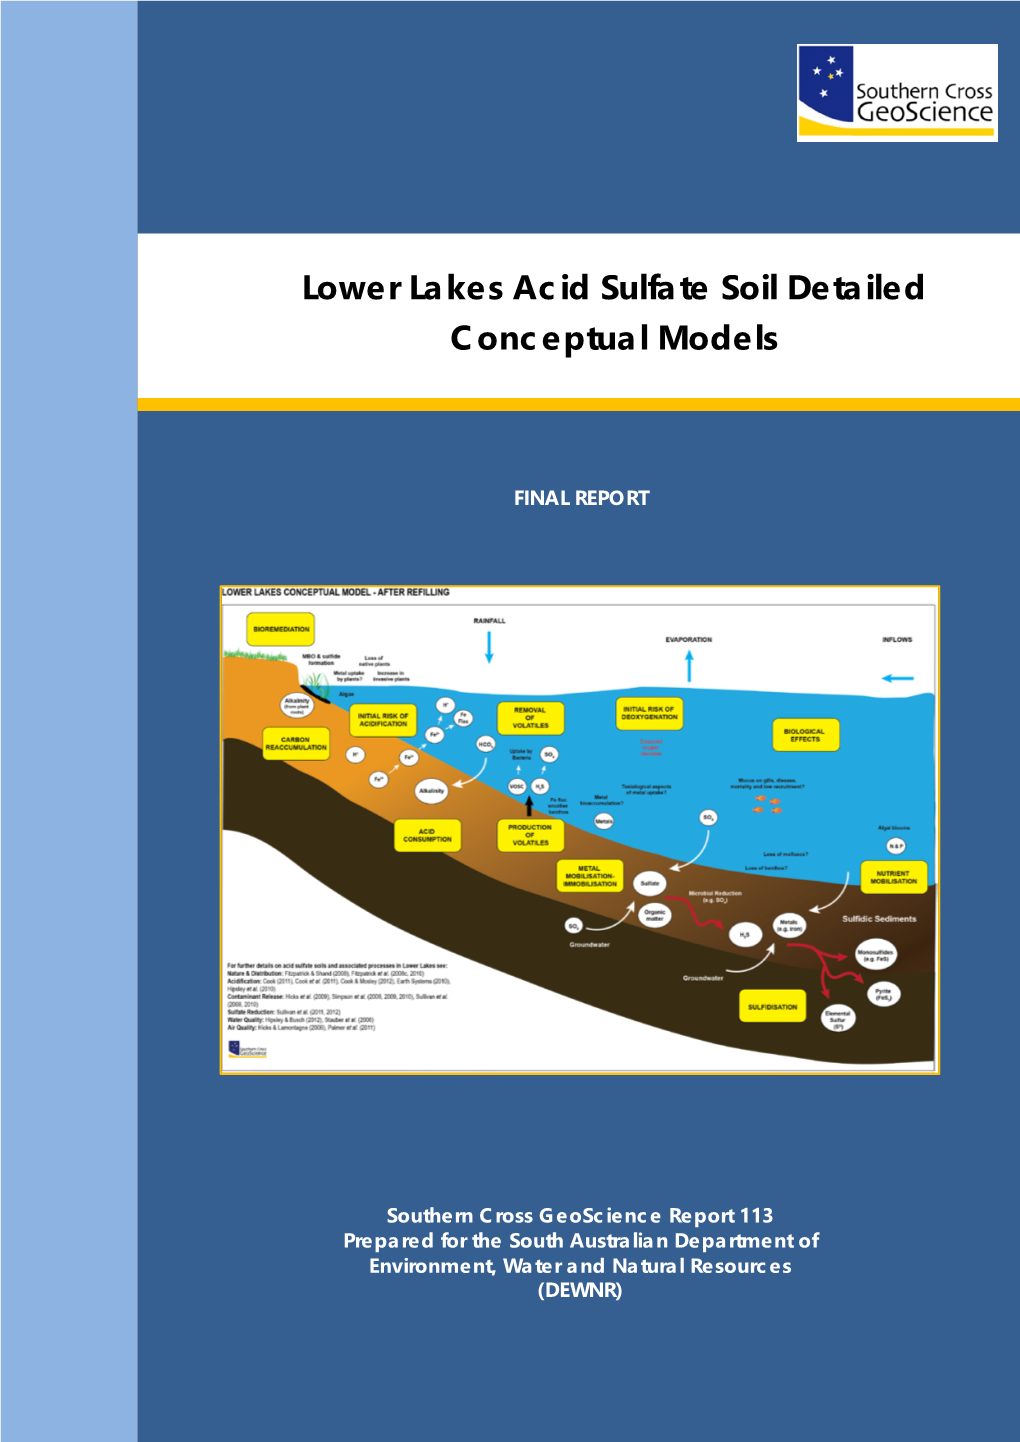 Lower Lakes Acid Sulfate Soil Detailed Conceptual Models